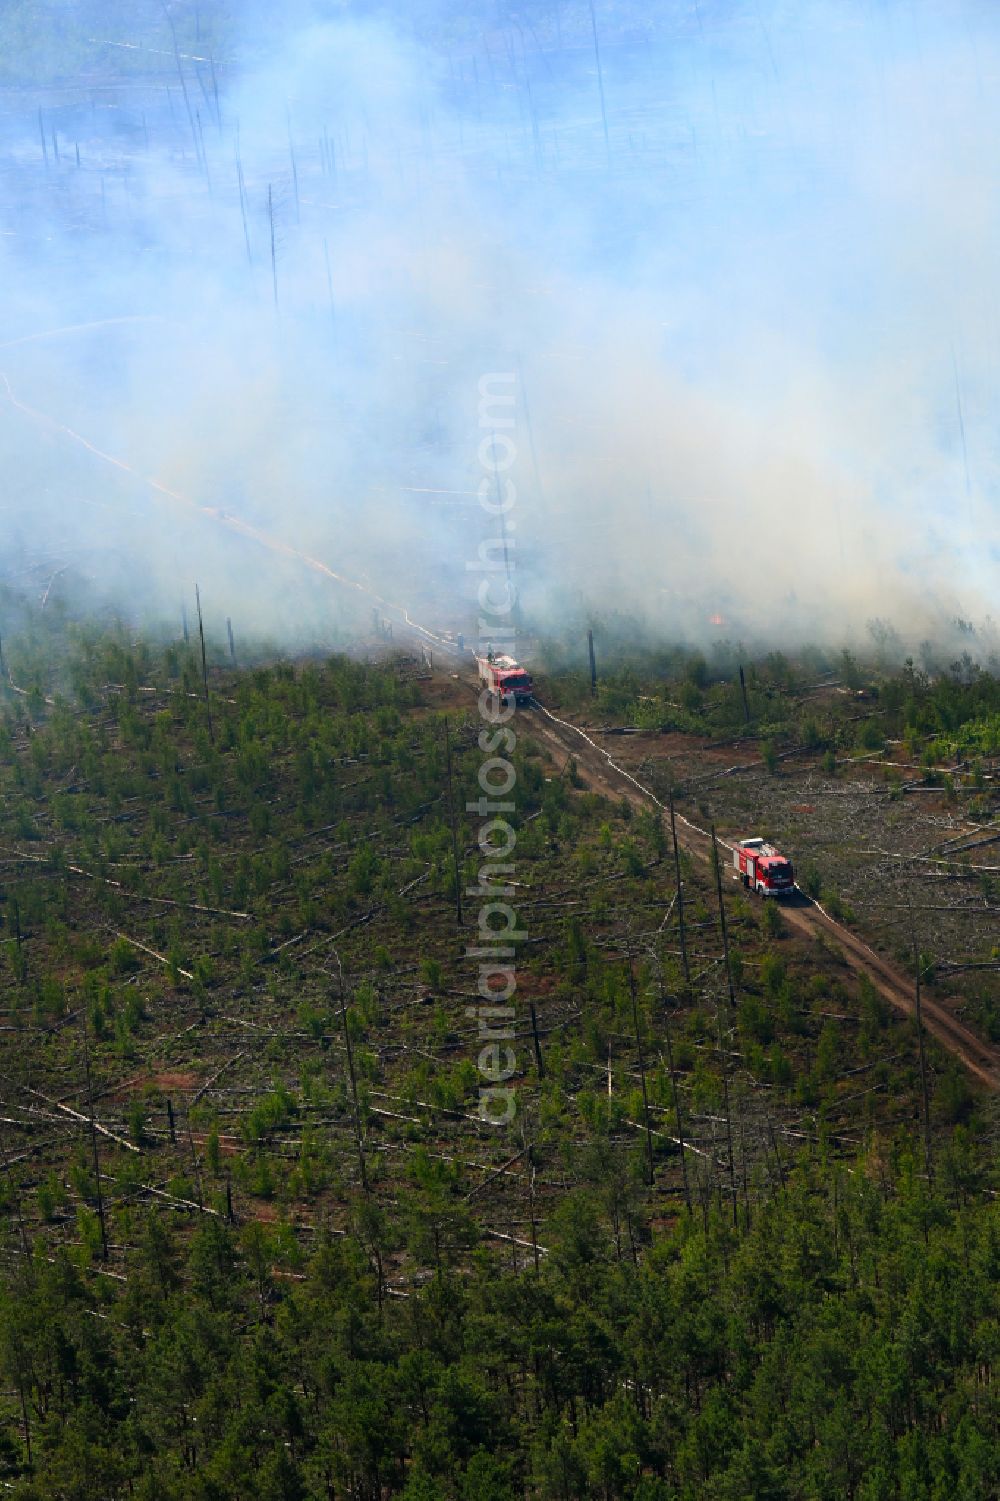 Treuenbrietzen from the bird's eye view: Smoke clouds by the Great Fire - destroyed forest fire tree population in a wooded area - forest terrain in the district Bardenitz in Treuenbrietzen in the state Brandenburg, Germany